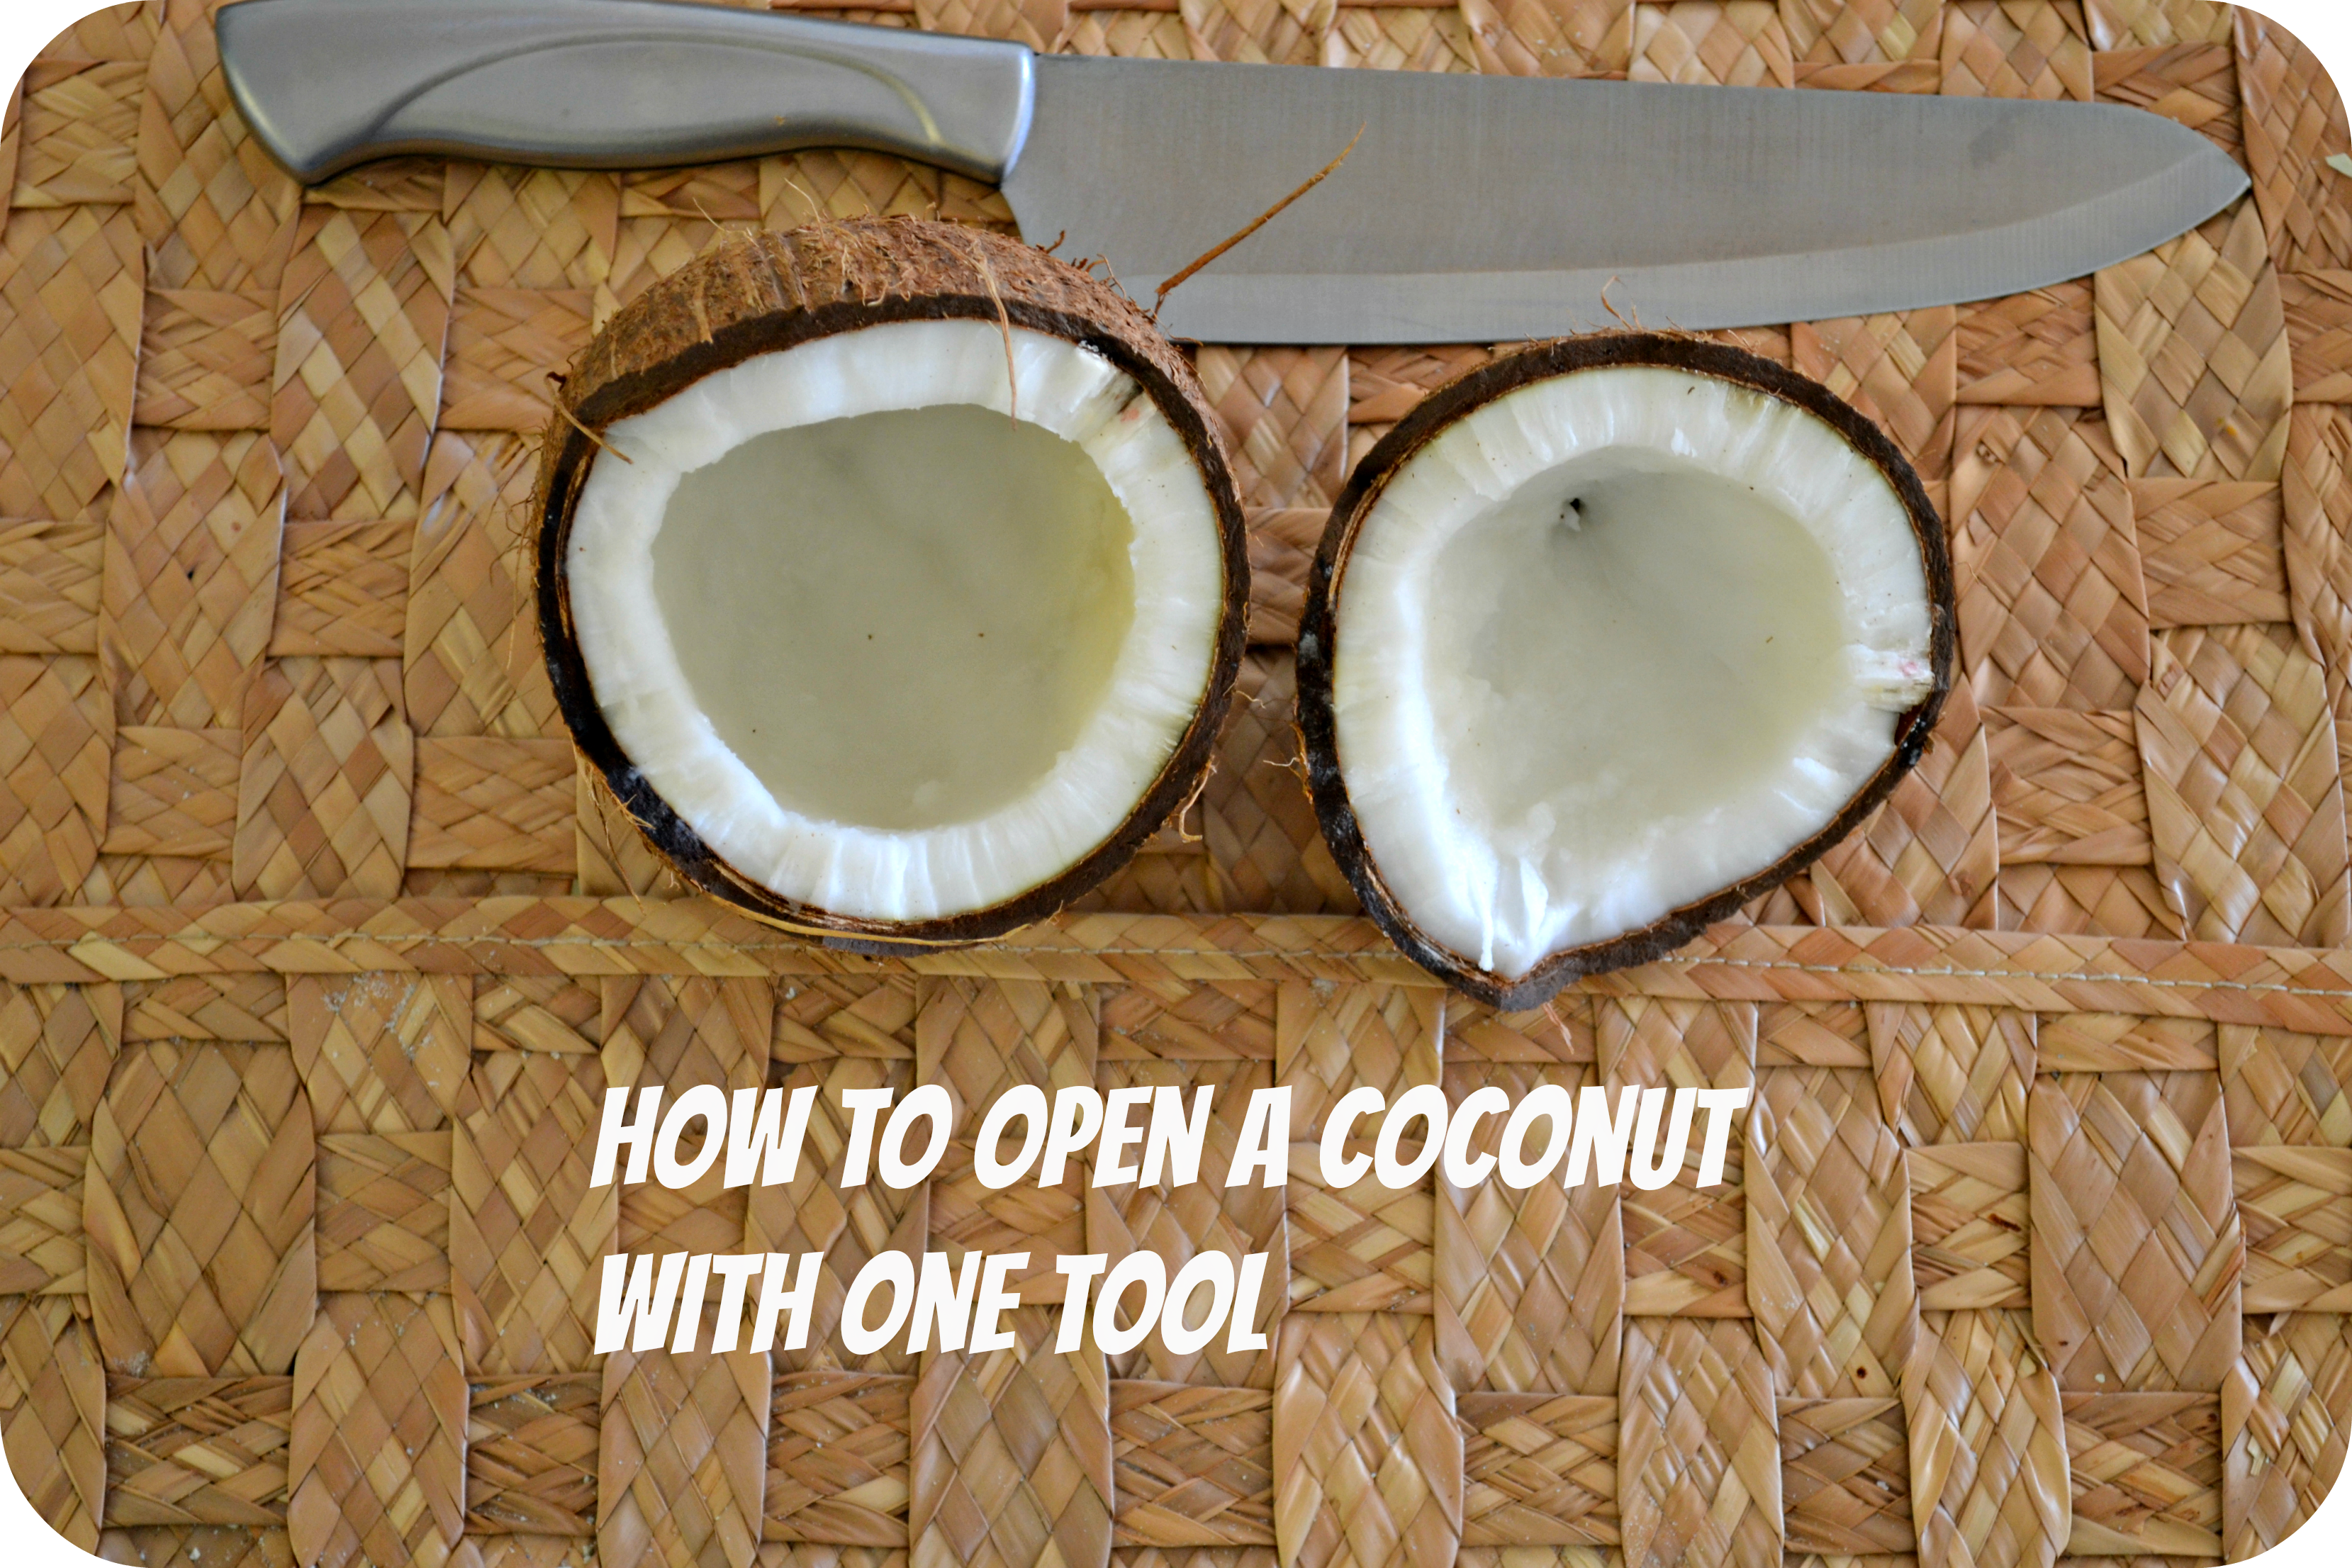 https://sofabfood.com/wp-content/uploads/2015/01/how-to-open-a-coconut-with-one-tool.png